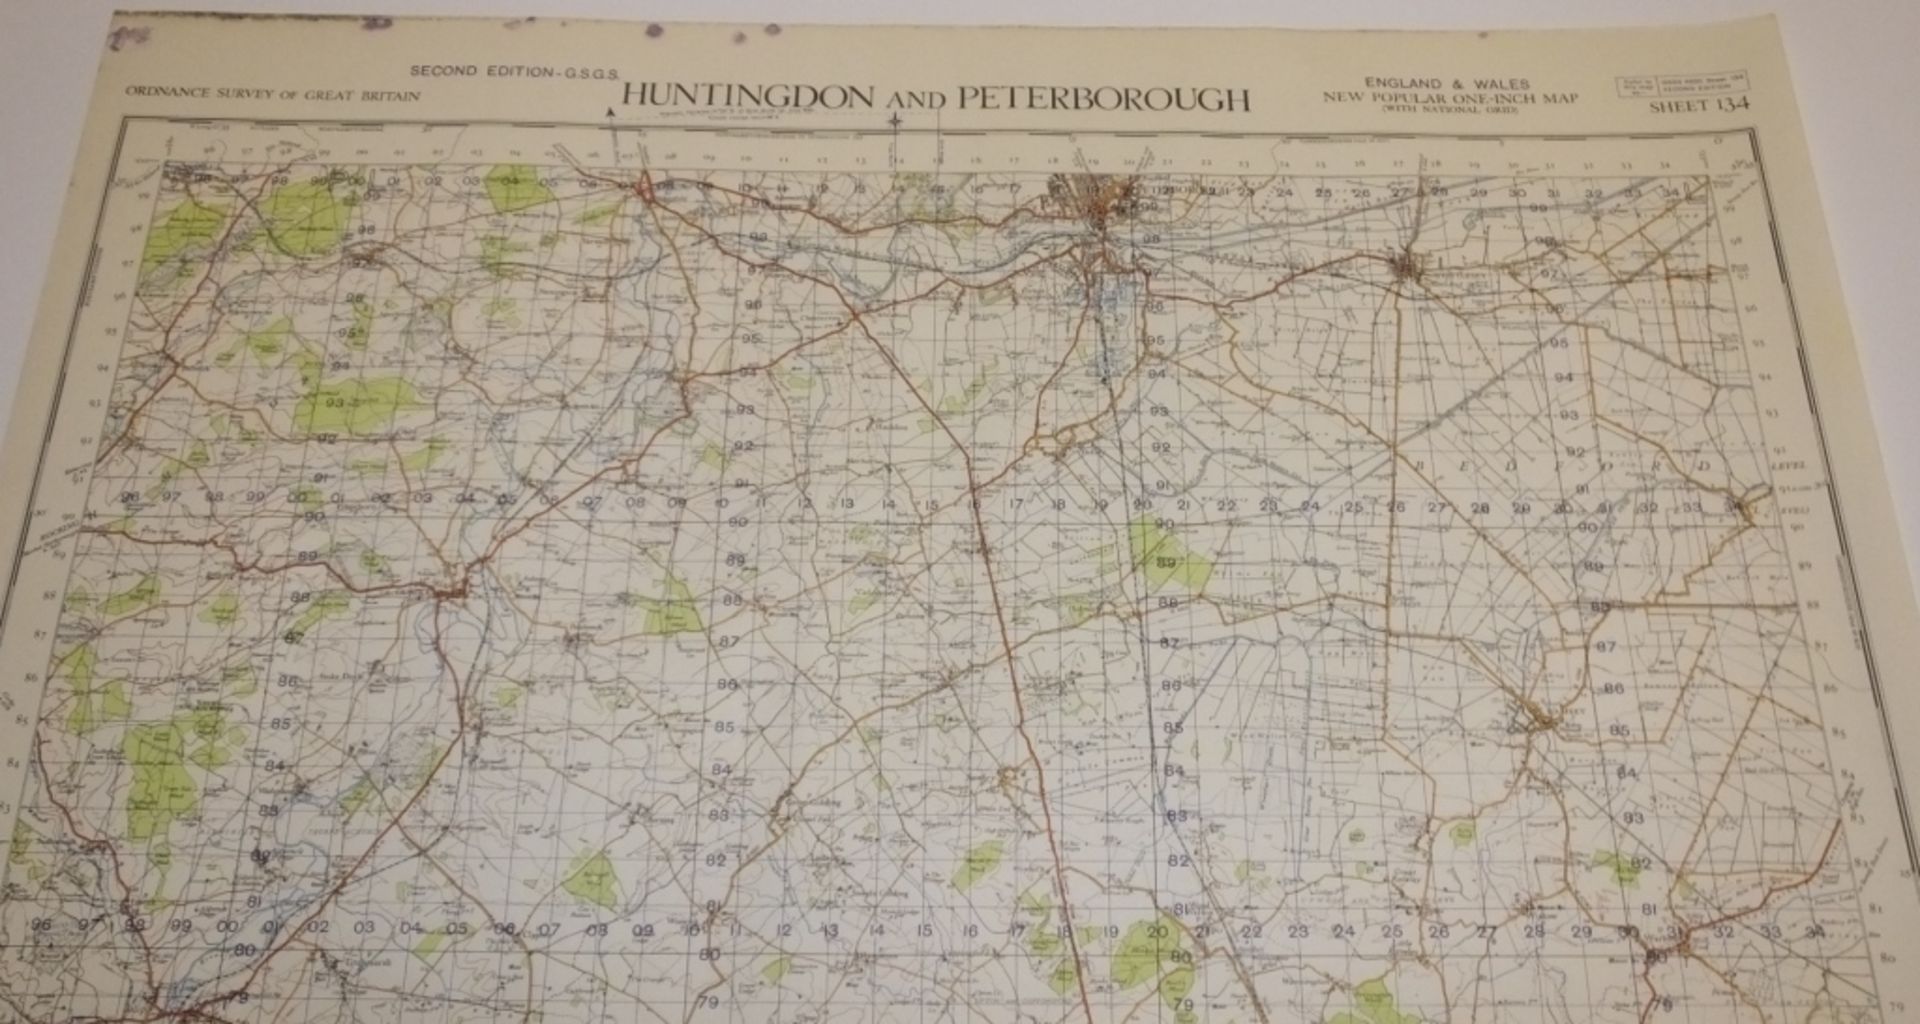 26x ENGLAND & WALES MAP HUNTINGDON PETERBOROUGH 1INCH 1MILE 1952 2ND EDITION 4620 GSGS SHE - Image 3 of 5